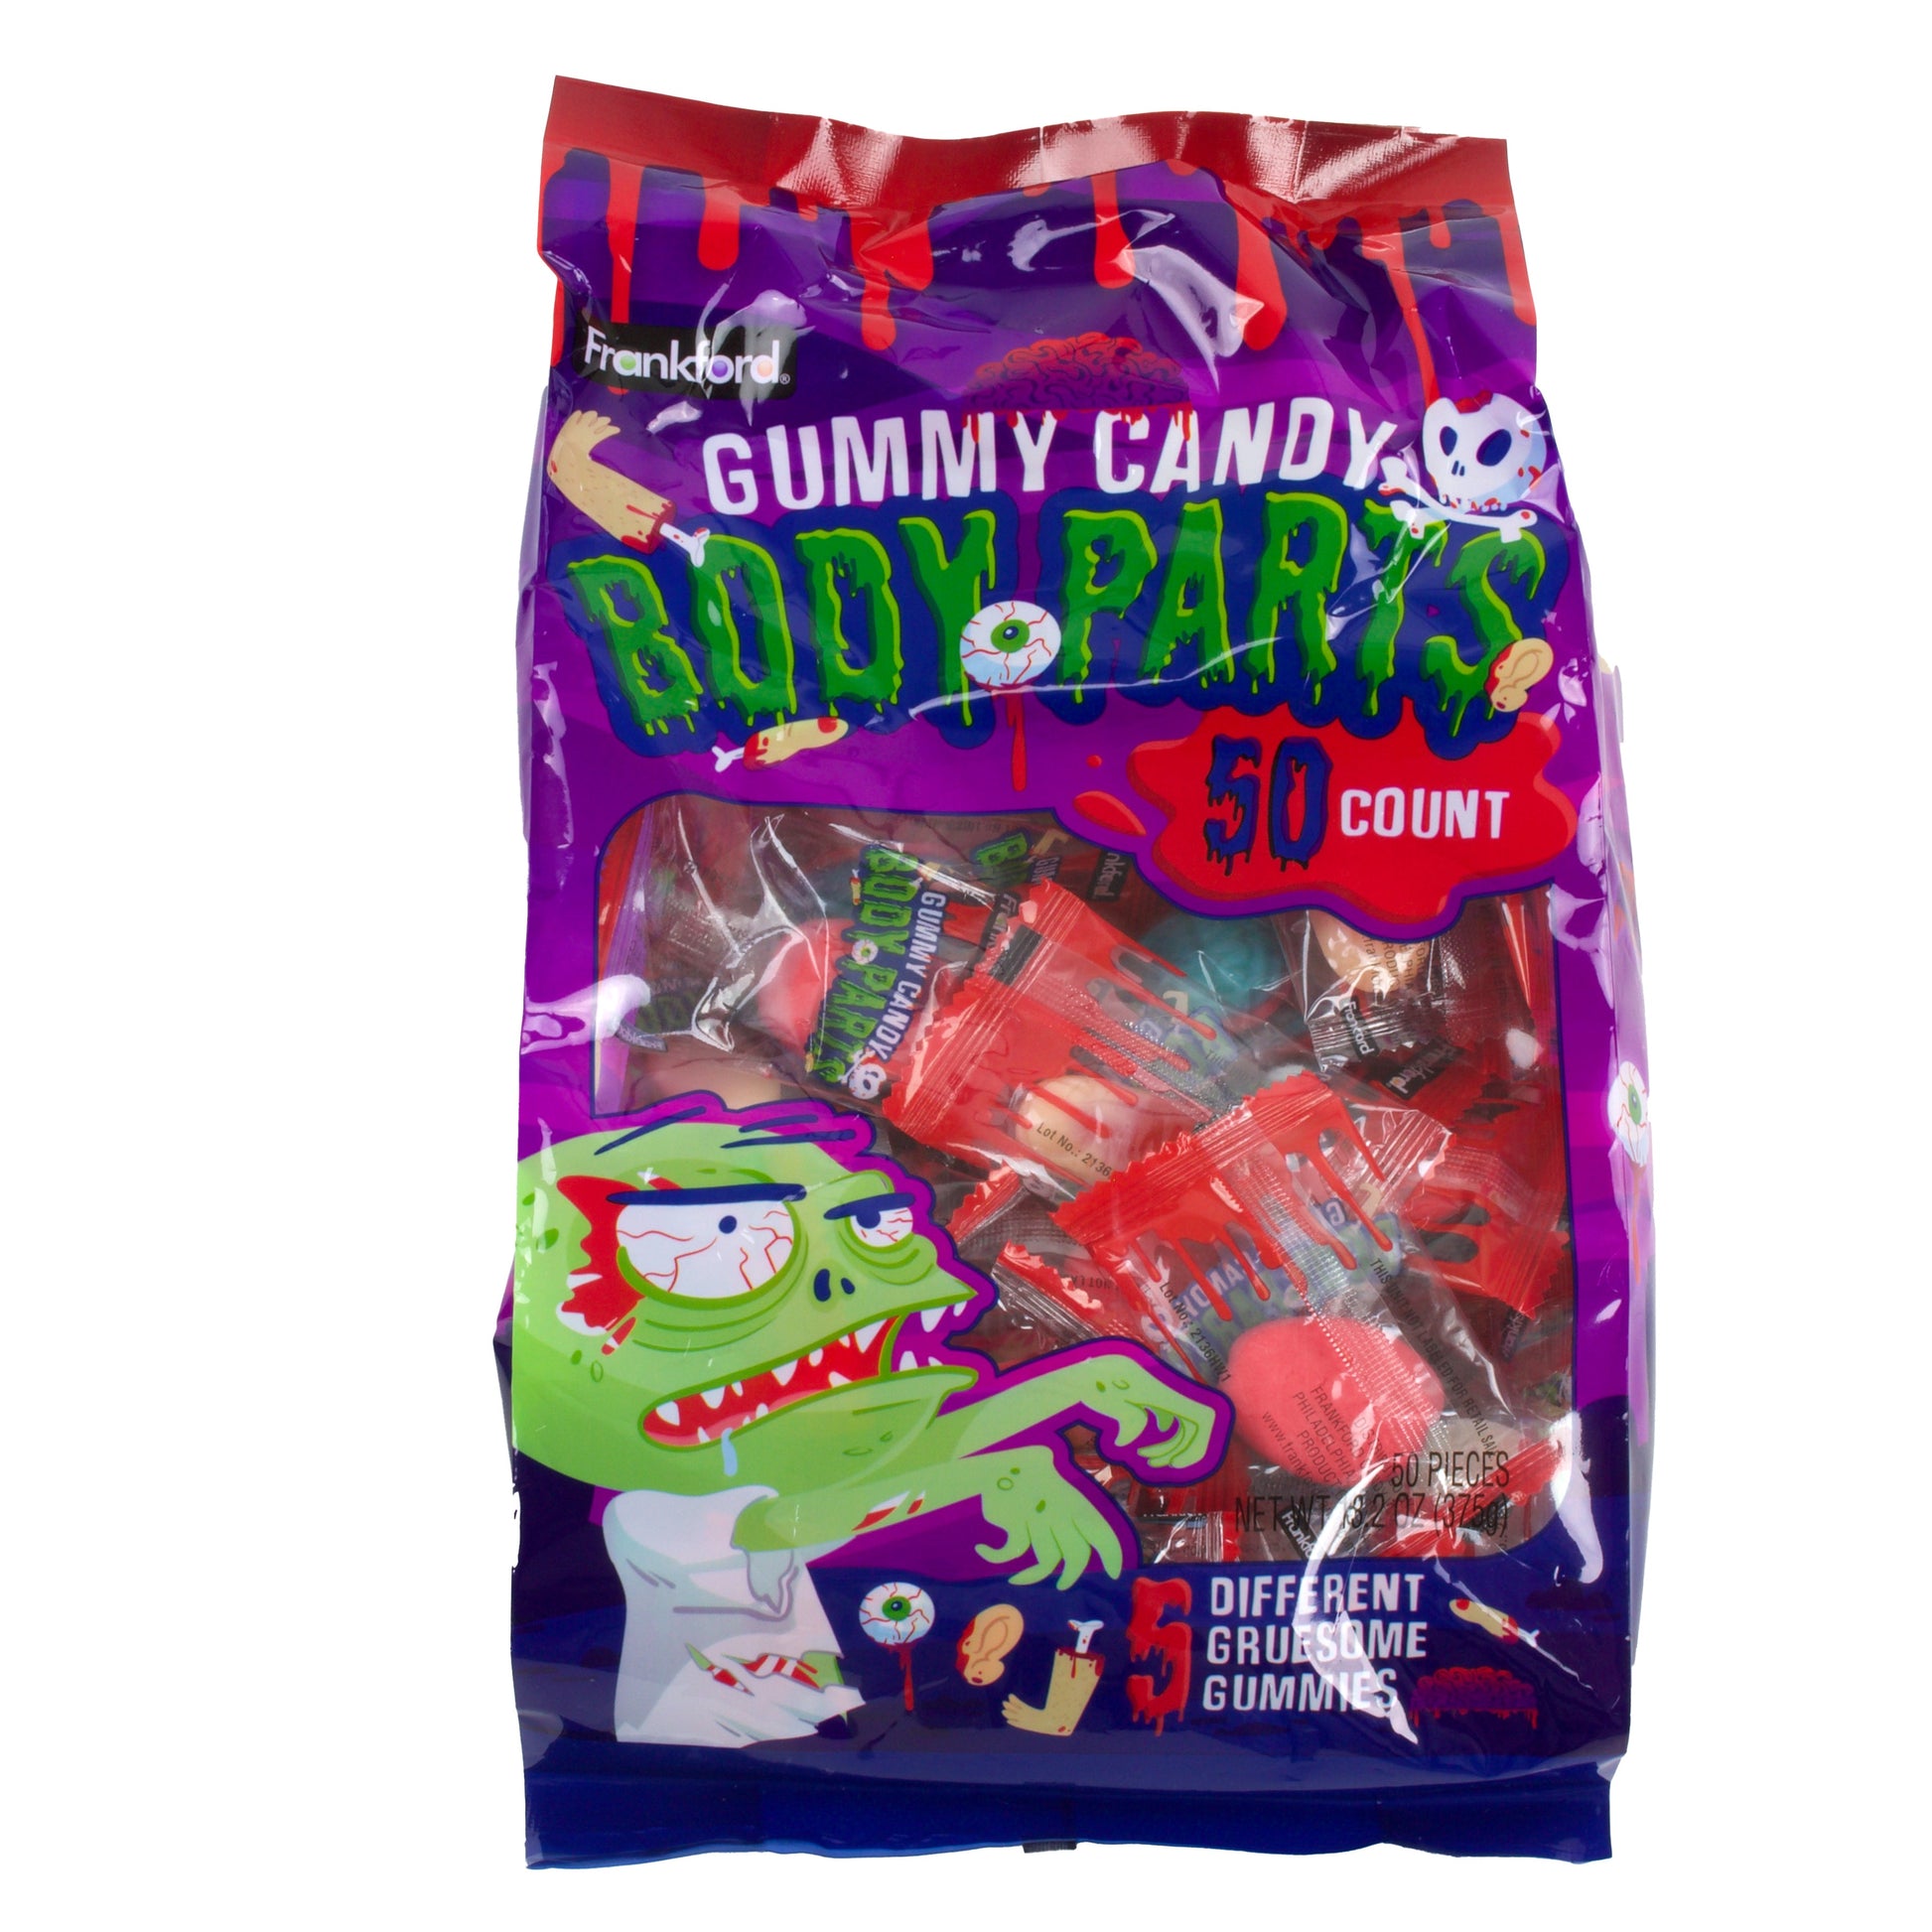 Purple bag with green zombie and dripping red blood with 50 individually wrapped gummies